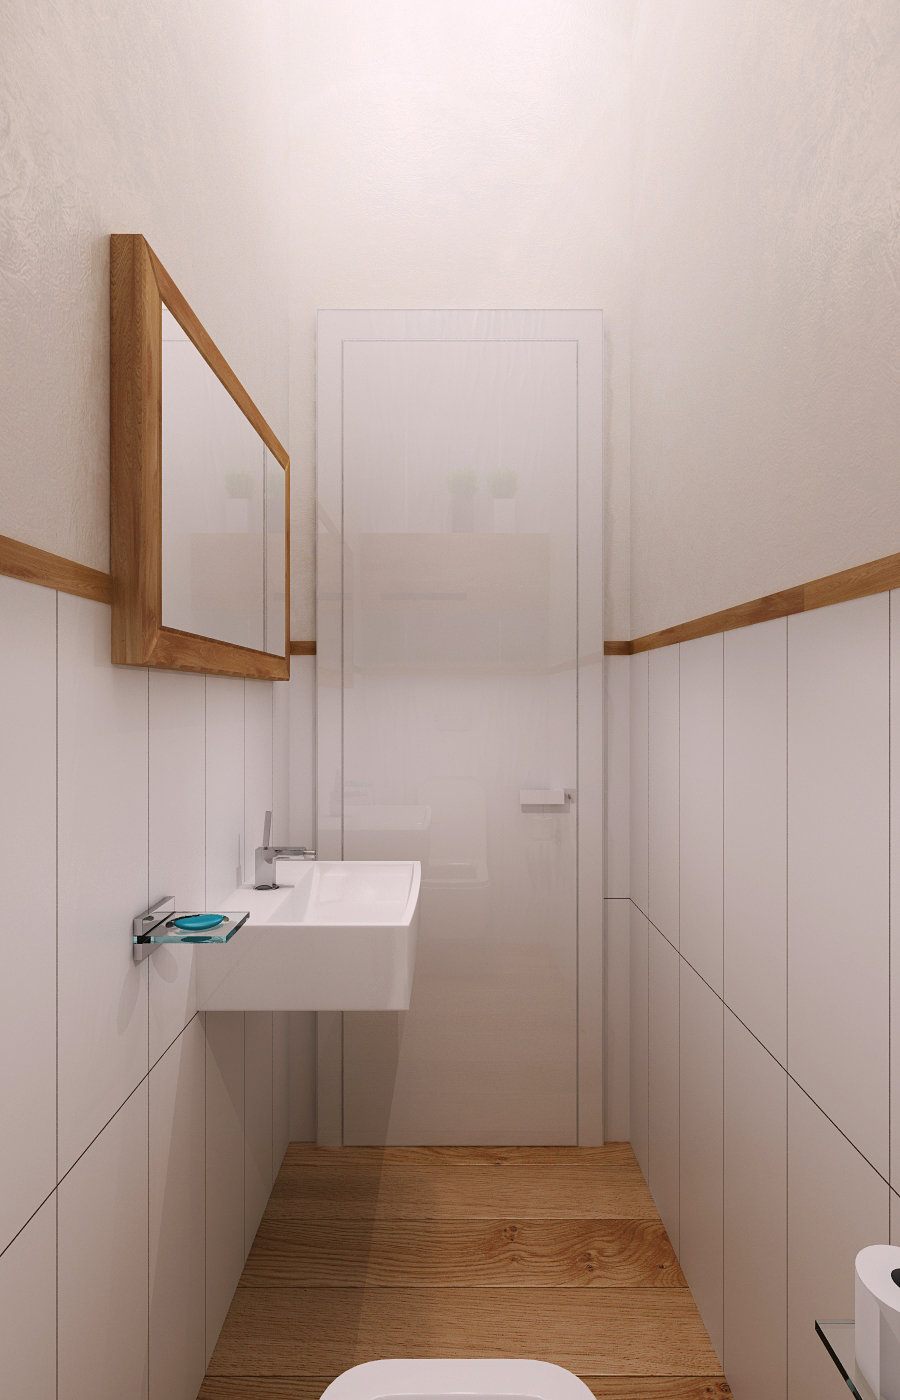 The idea of ​​bathroom design in the office.